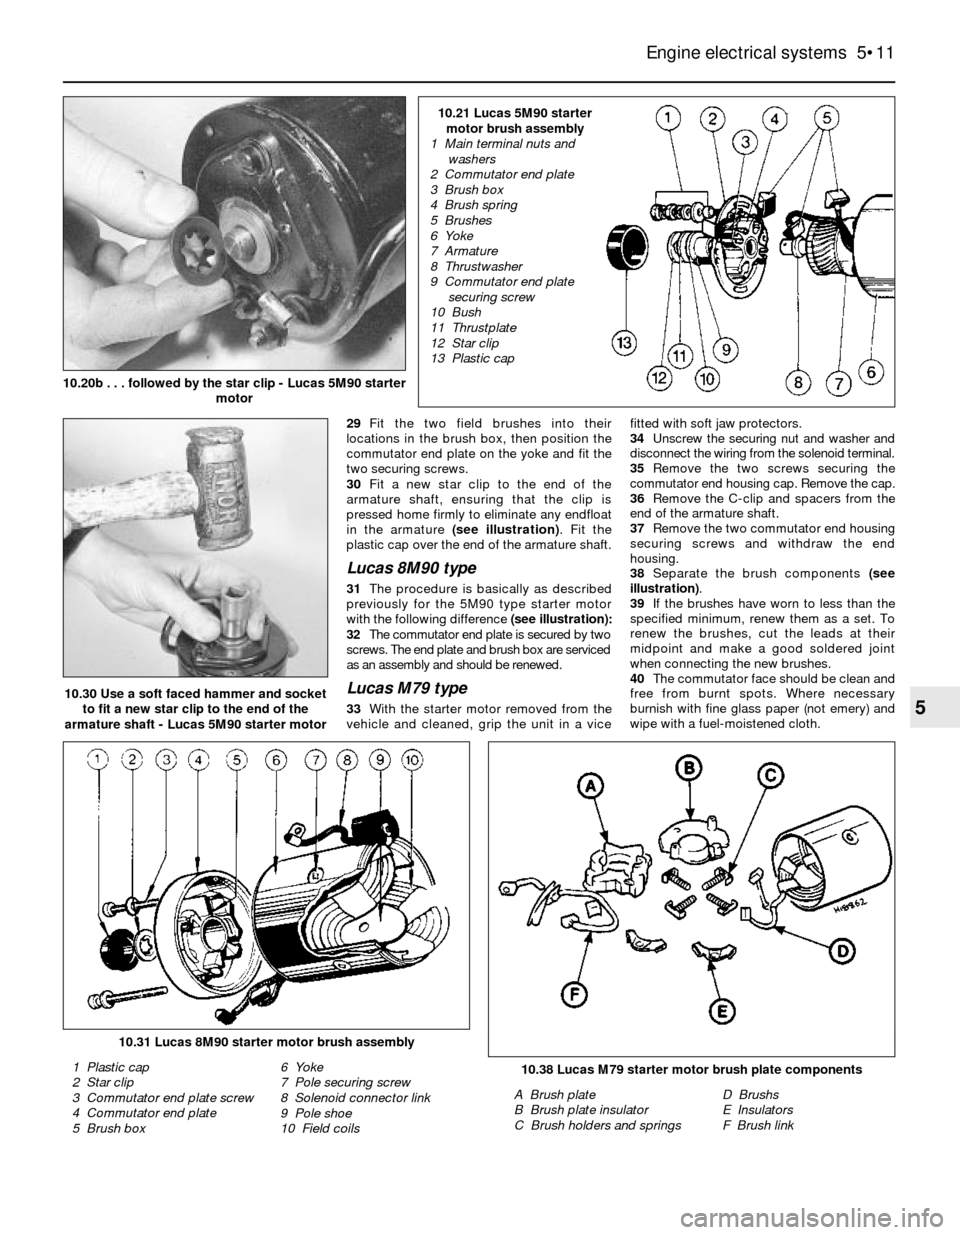 FORD SIERRA 1991 2.G Engine Electrical Systems Workshop Manual 29Fit the two field brushes into their
locations in the brush box, then position the
commutator end plate on the yoke and fit the
two securing screws.
30Fit a new star clip to the end of the
armature 